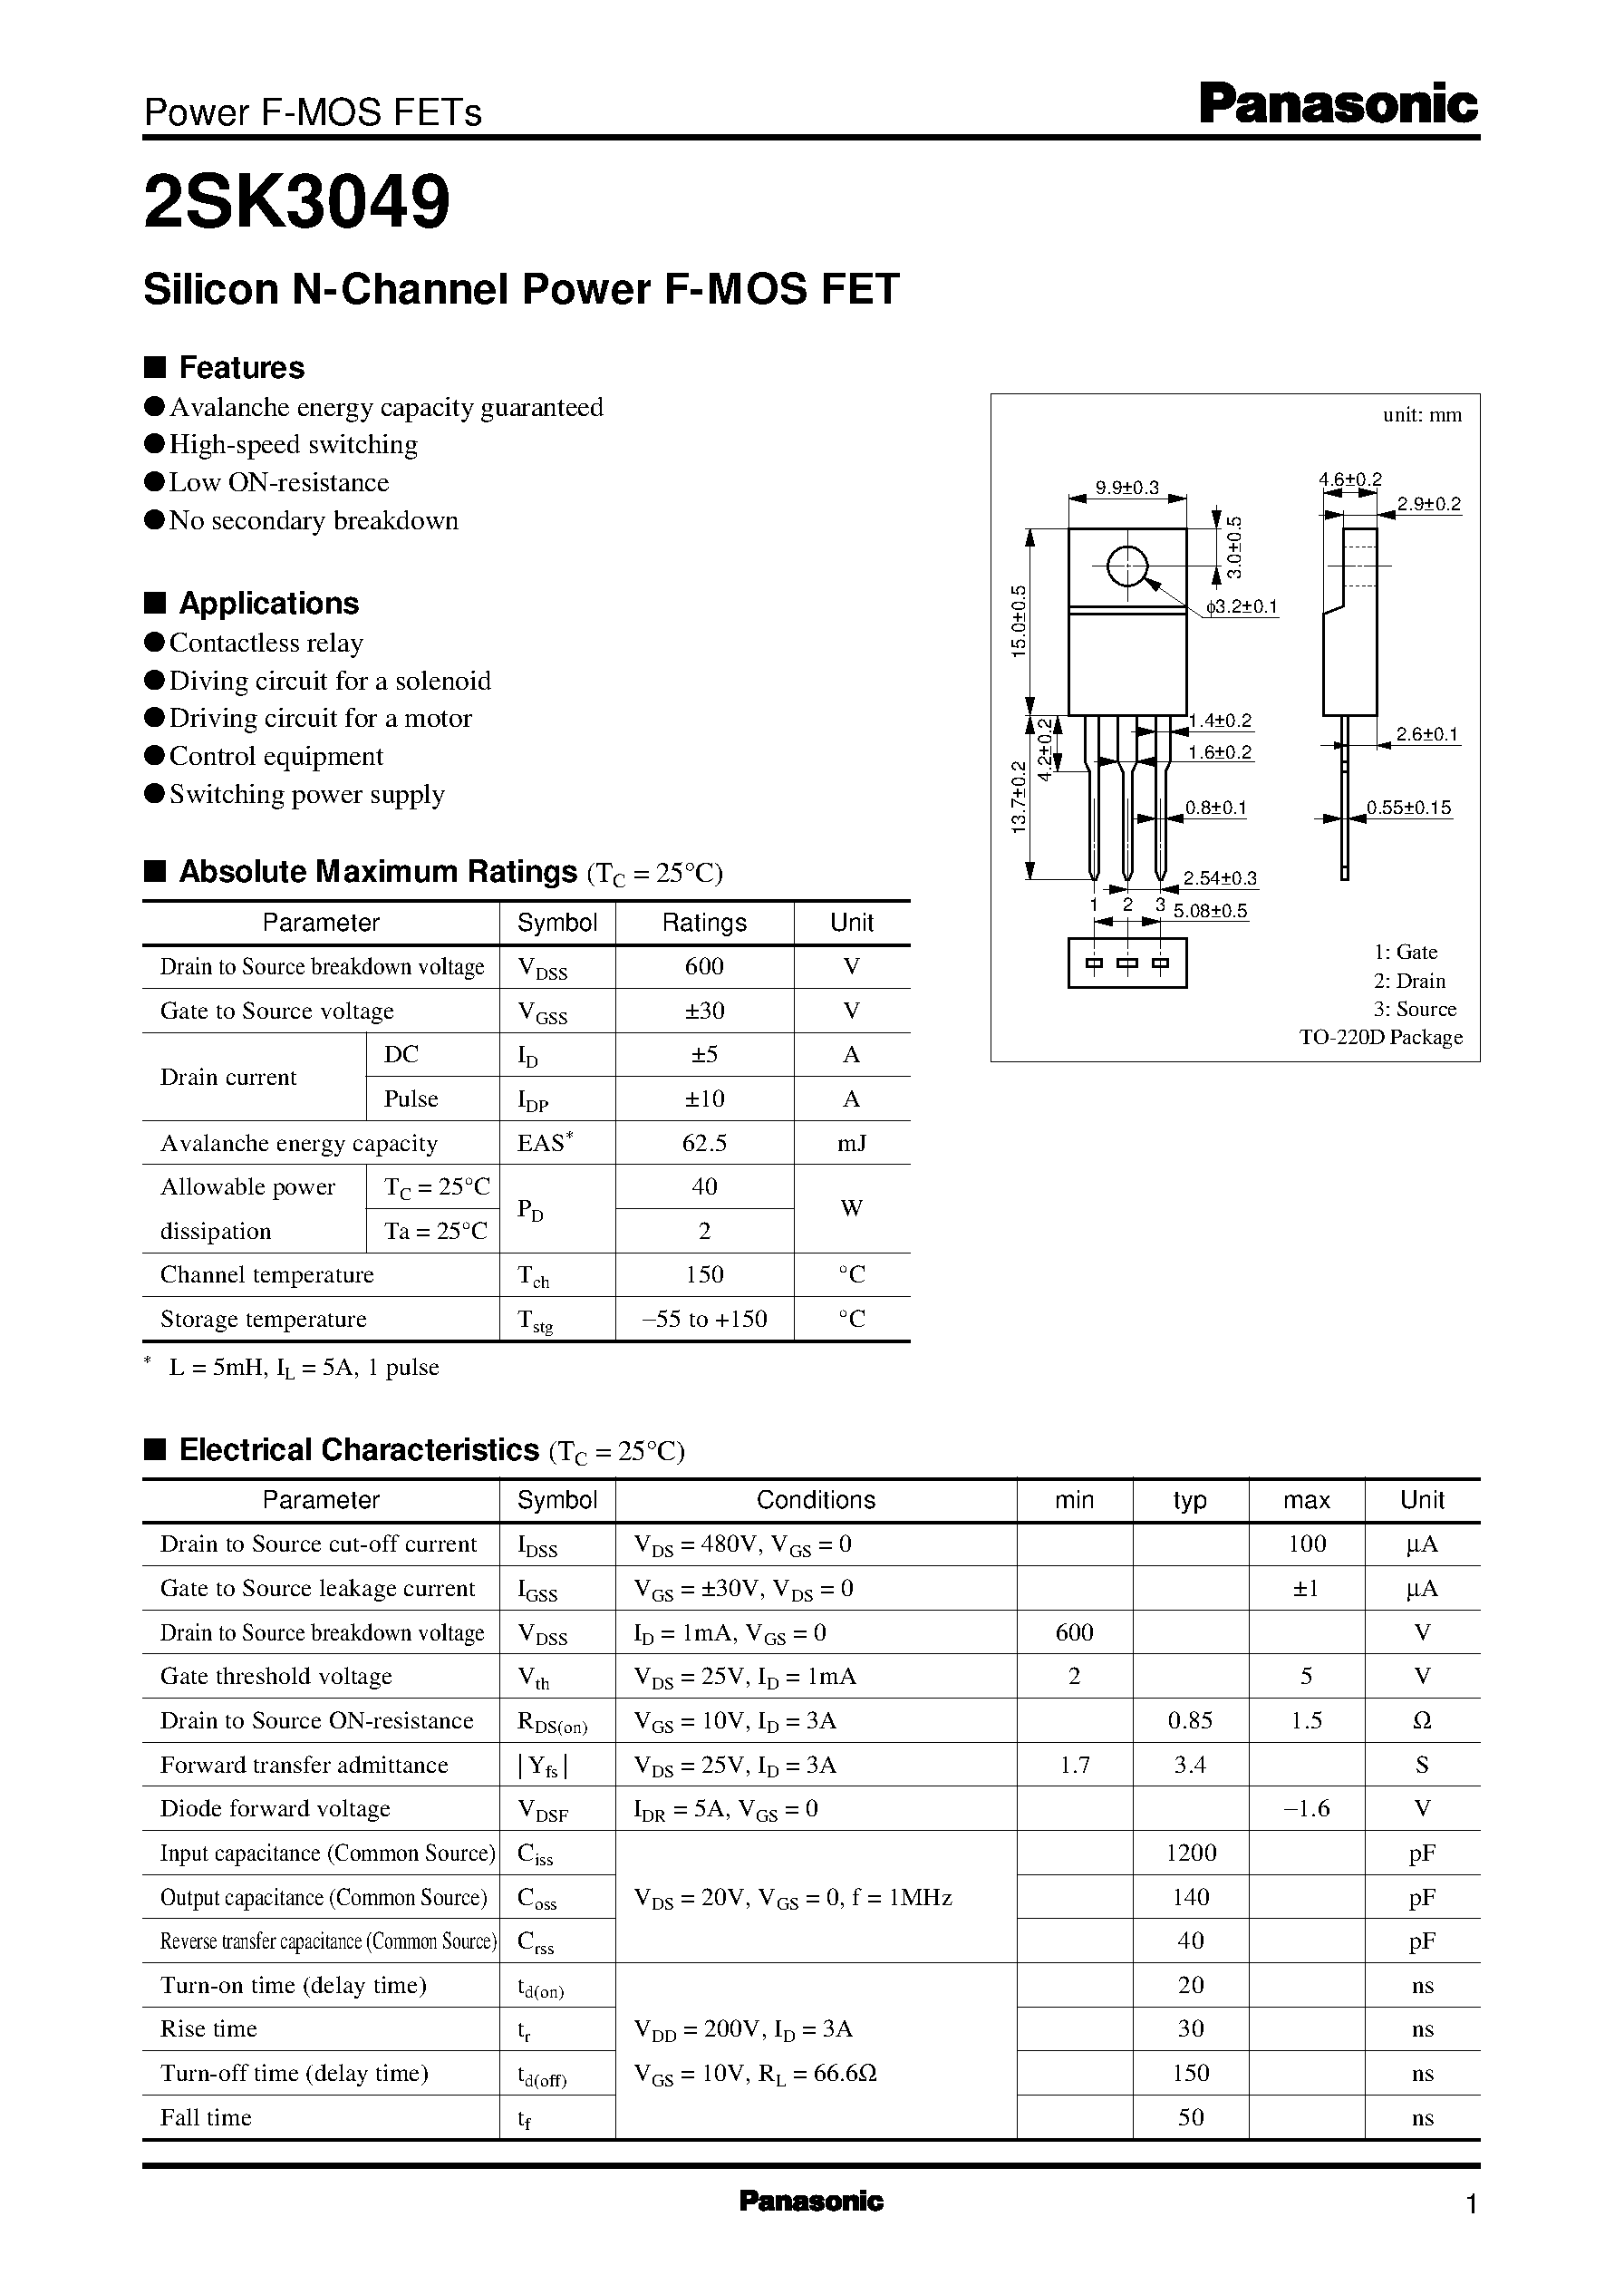 Datasheet 2SK3049 - Silicon N-Channel Power F-MOS FET page 1